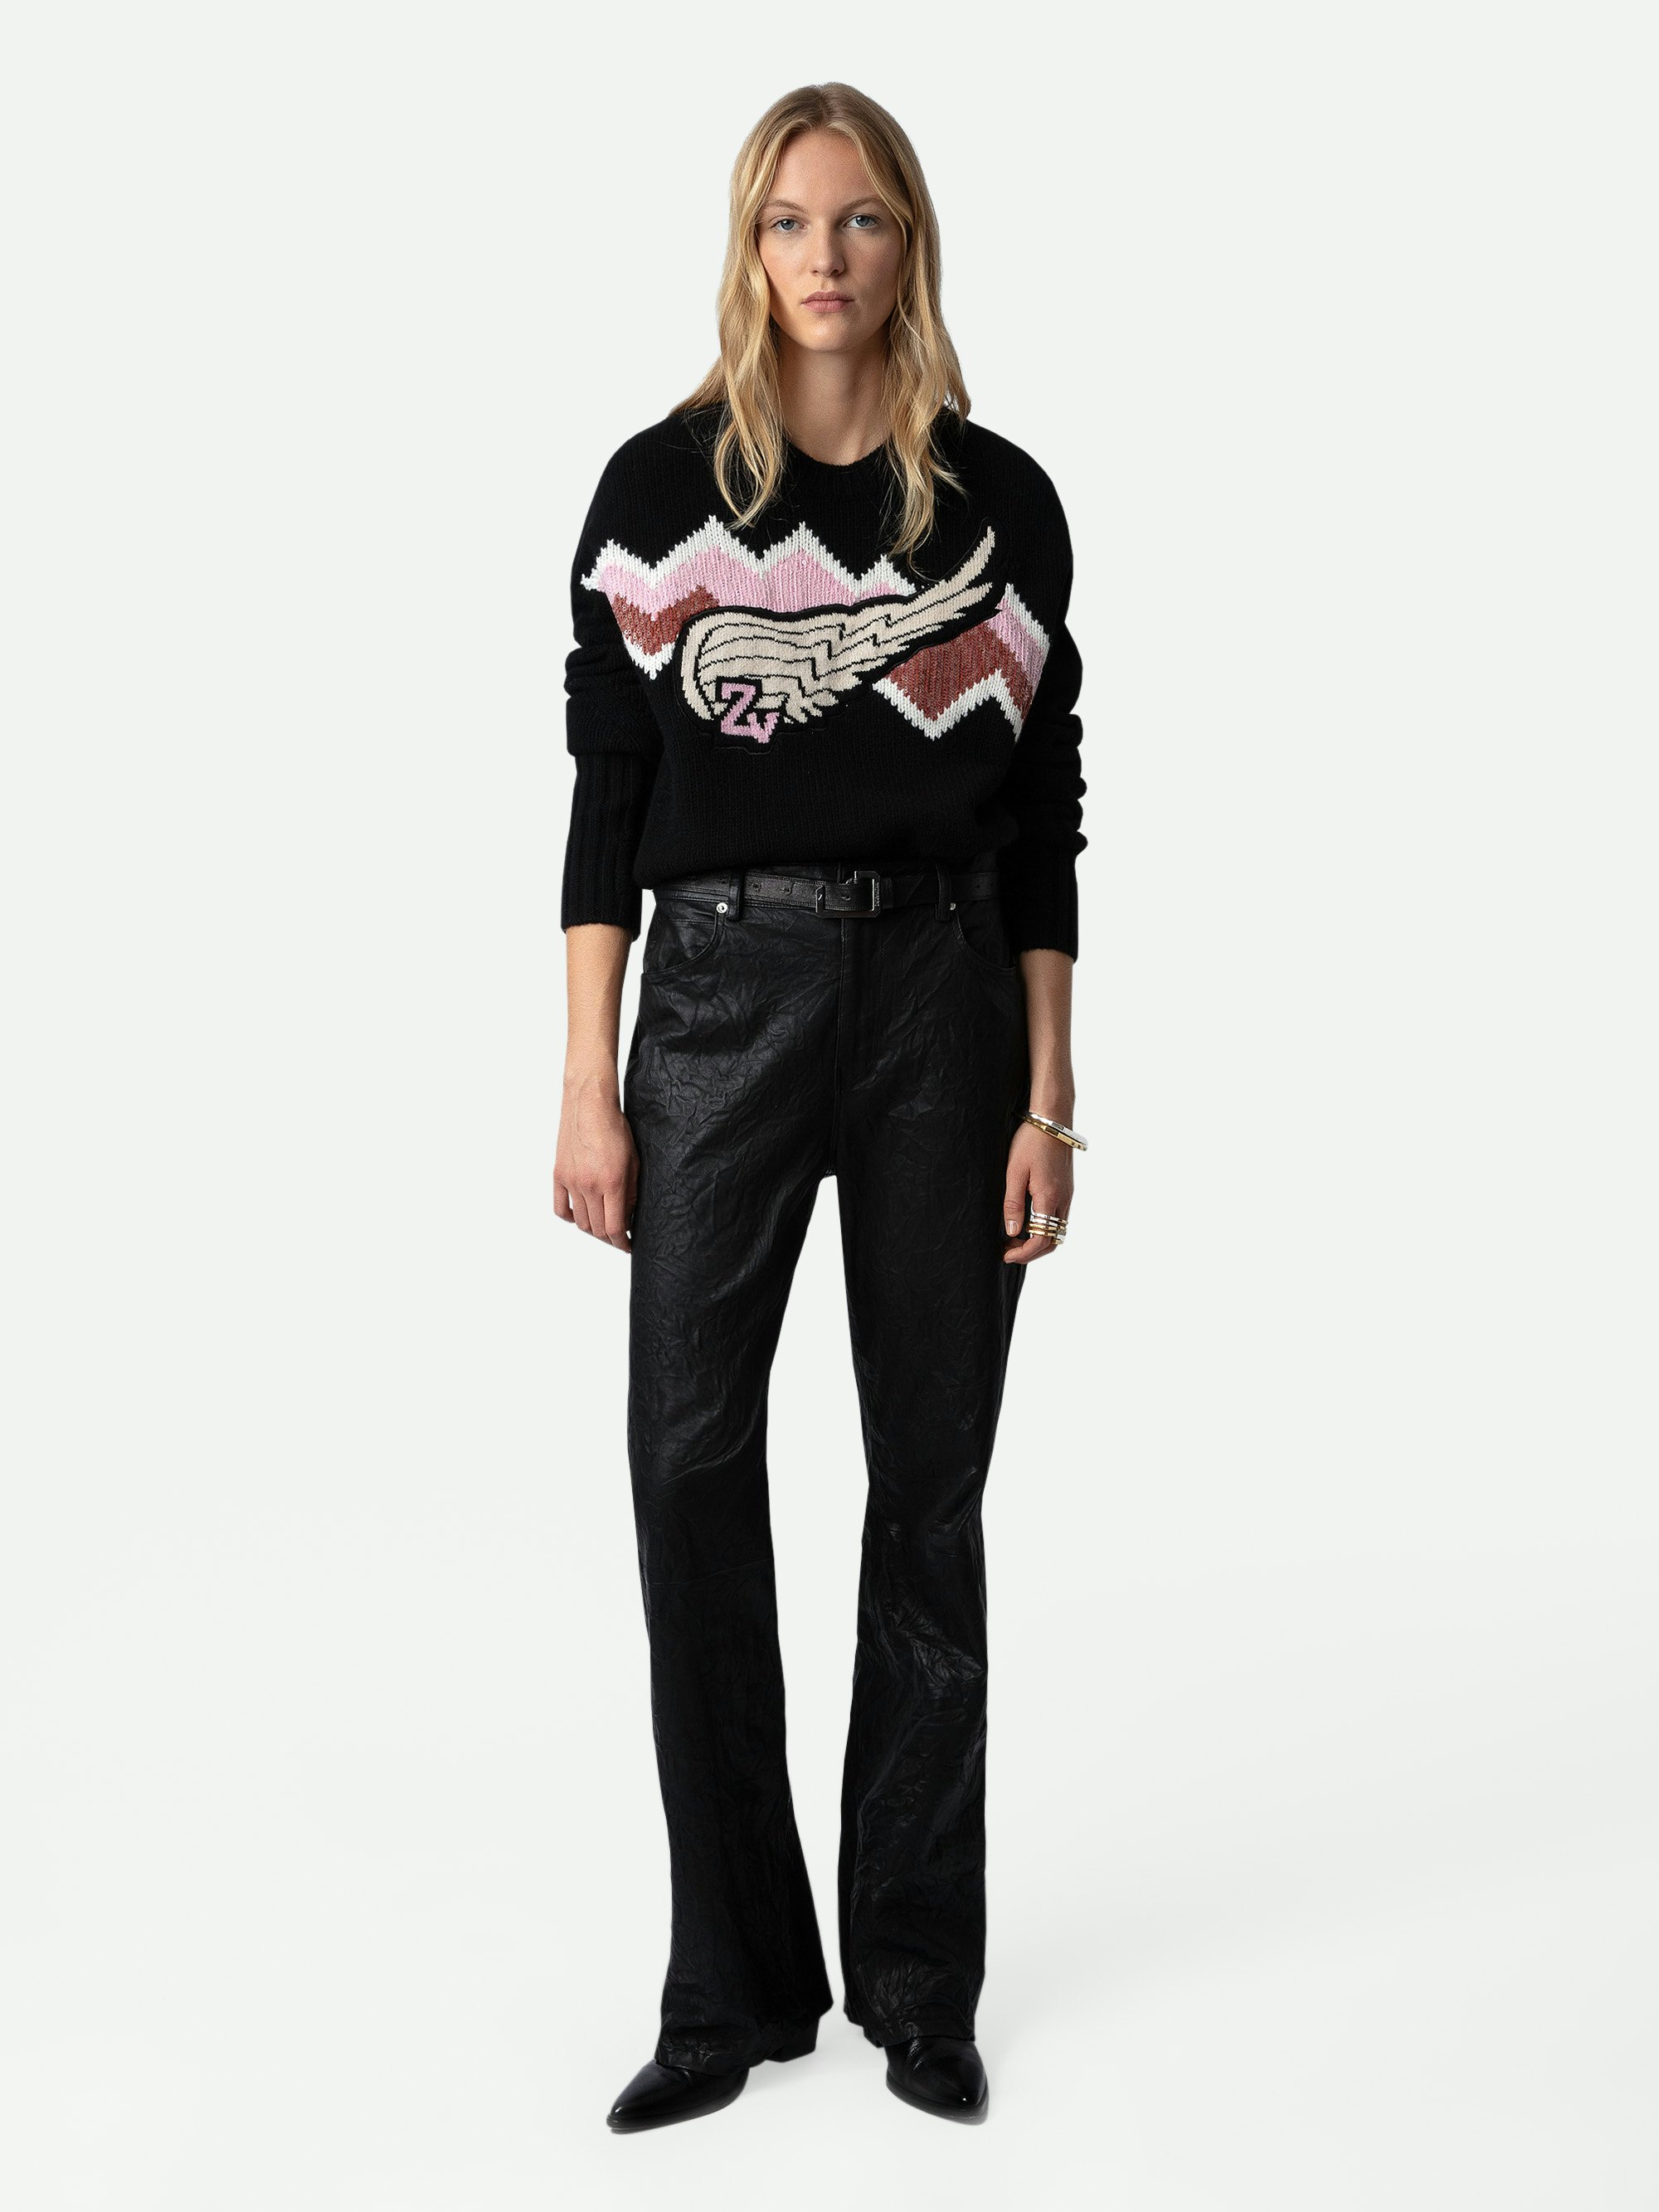 Bleez Sequin Sweater - Women's black cashmere sweater with pink chevron pattern, wing motif, and sequin embroidery